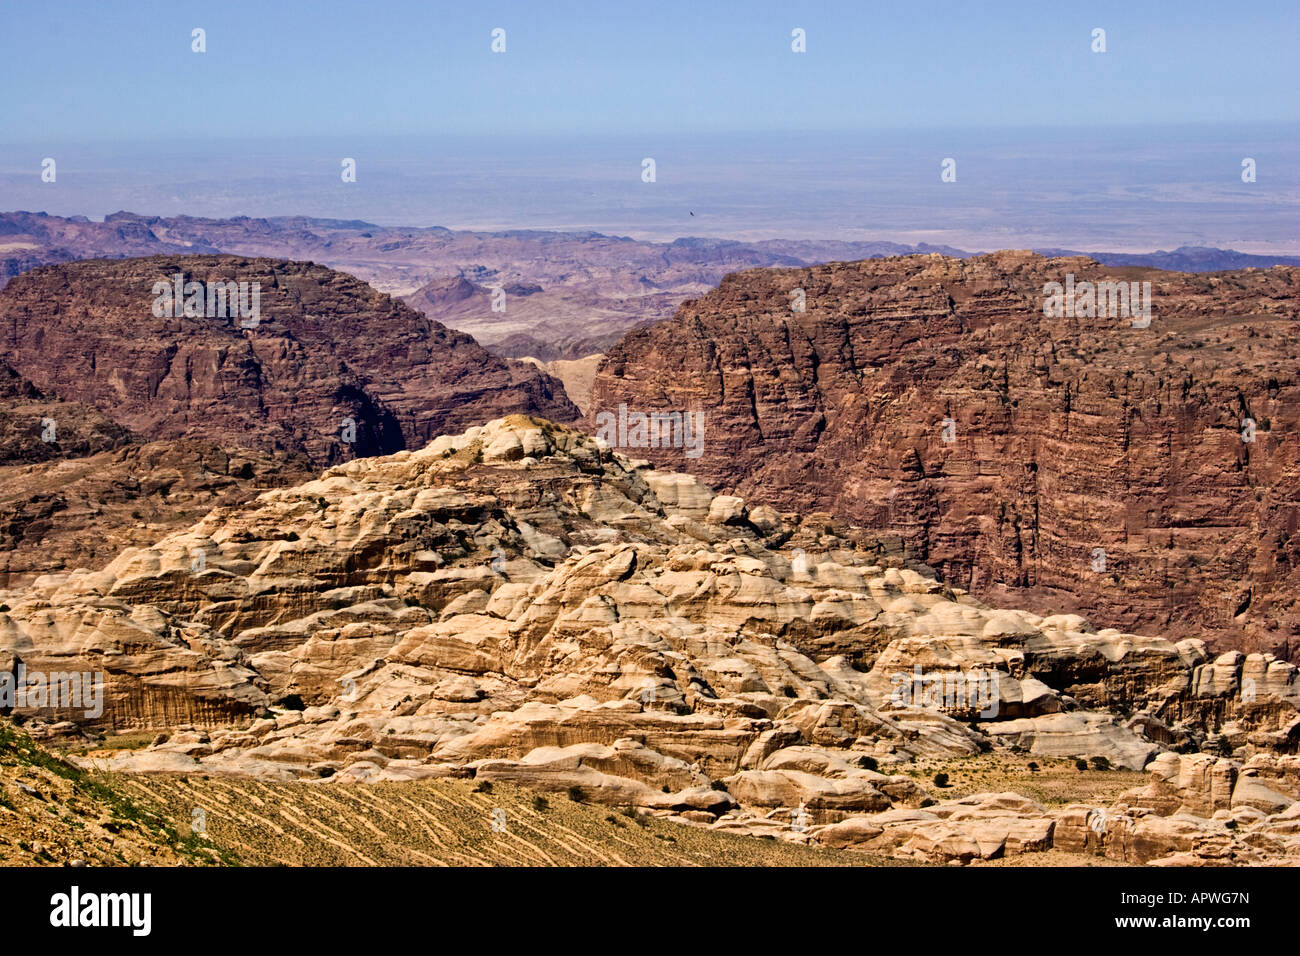 Jordan River Valley the Dead Sea plains and the surrounding hills and  mountains of Petra AH0008 Stock Photo - Alamy